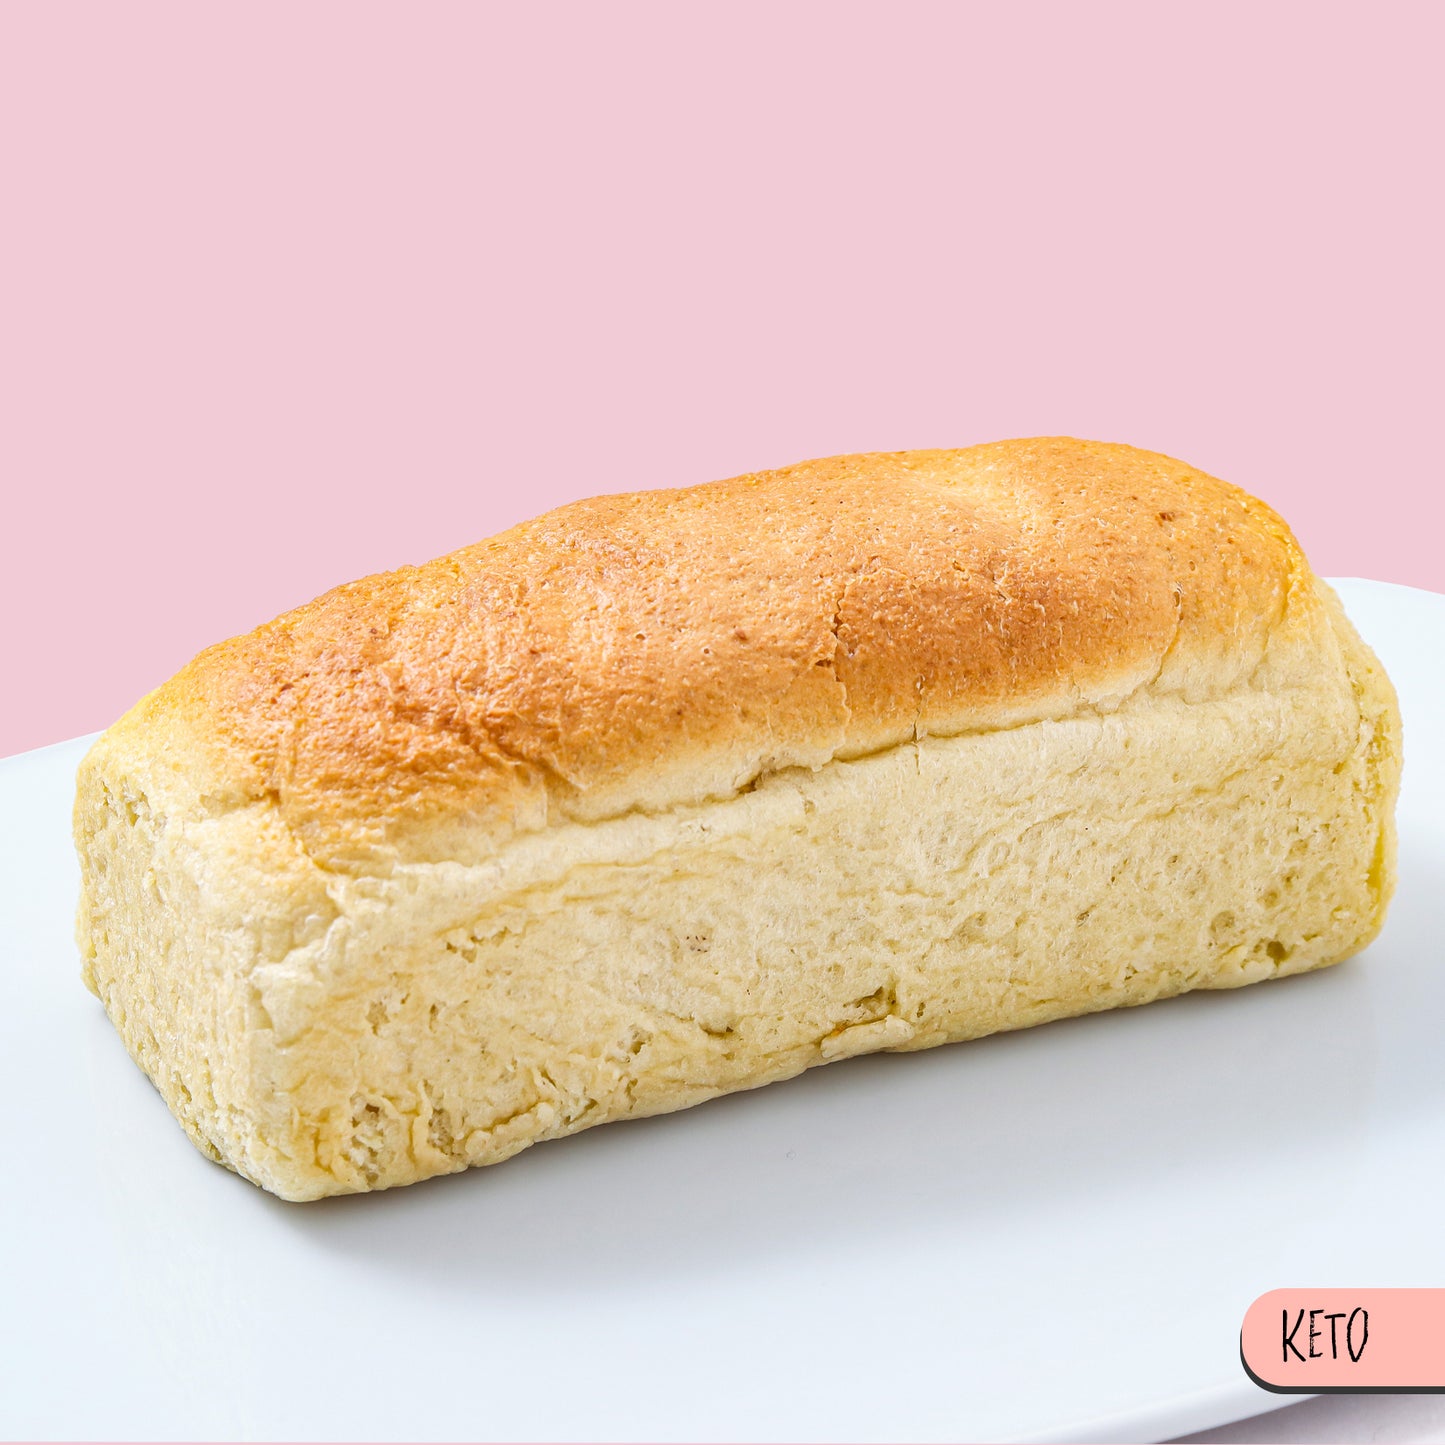 Keto loaf - A delicious and nutritious low-carb bread alternative perfect for those following a ketogenic diet.